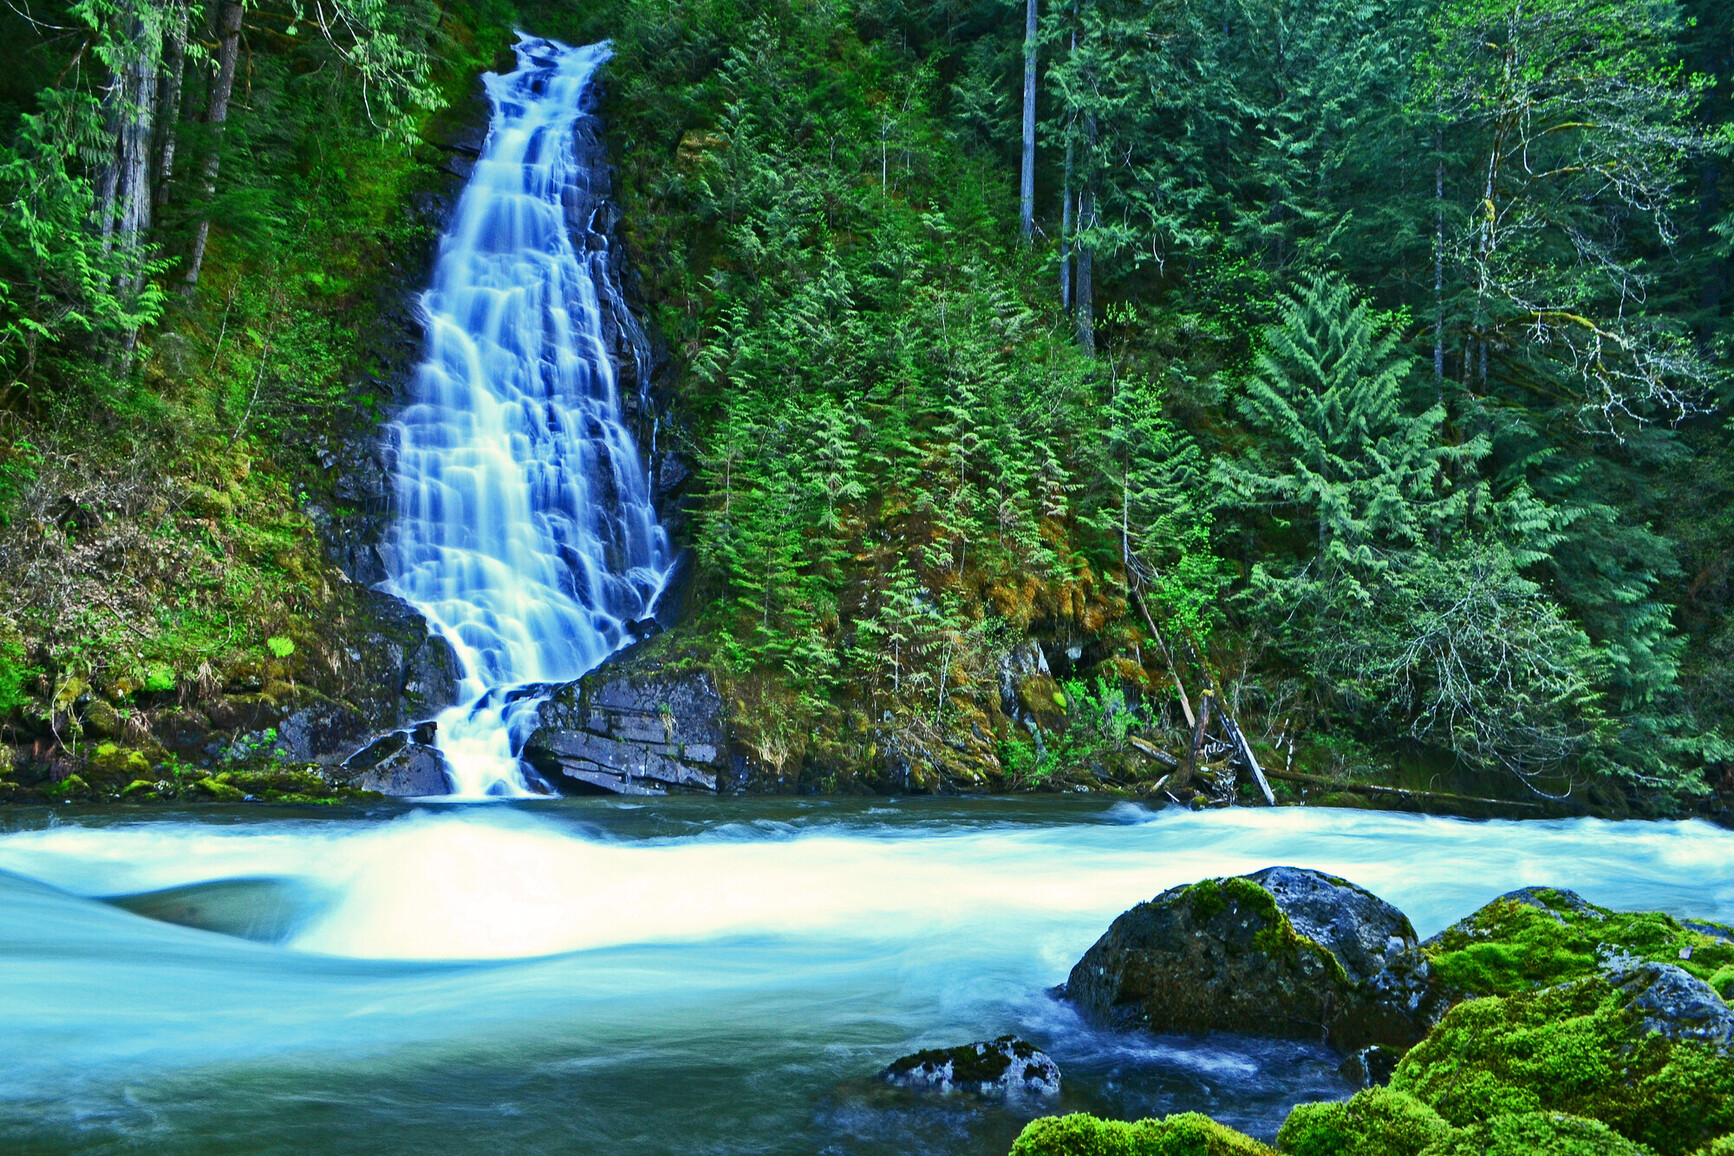 Waterfall from forested mountain flowing into lake. Moss covered rocks in foreground.